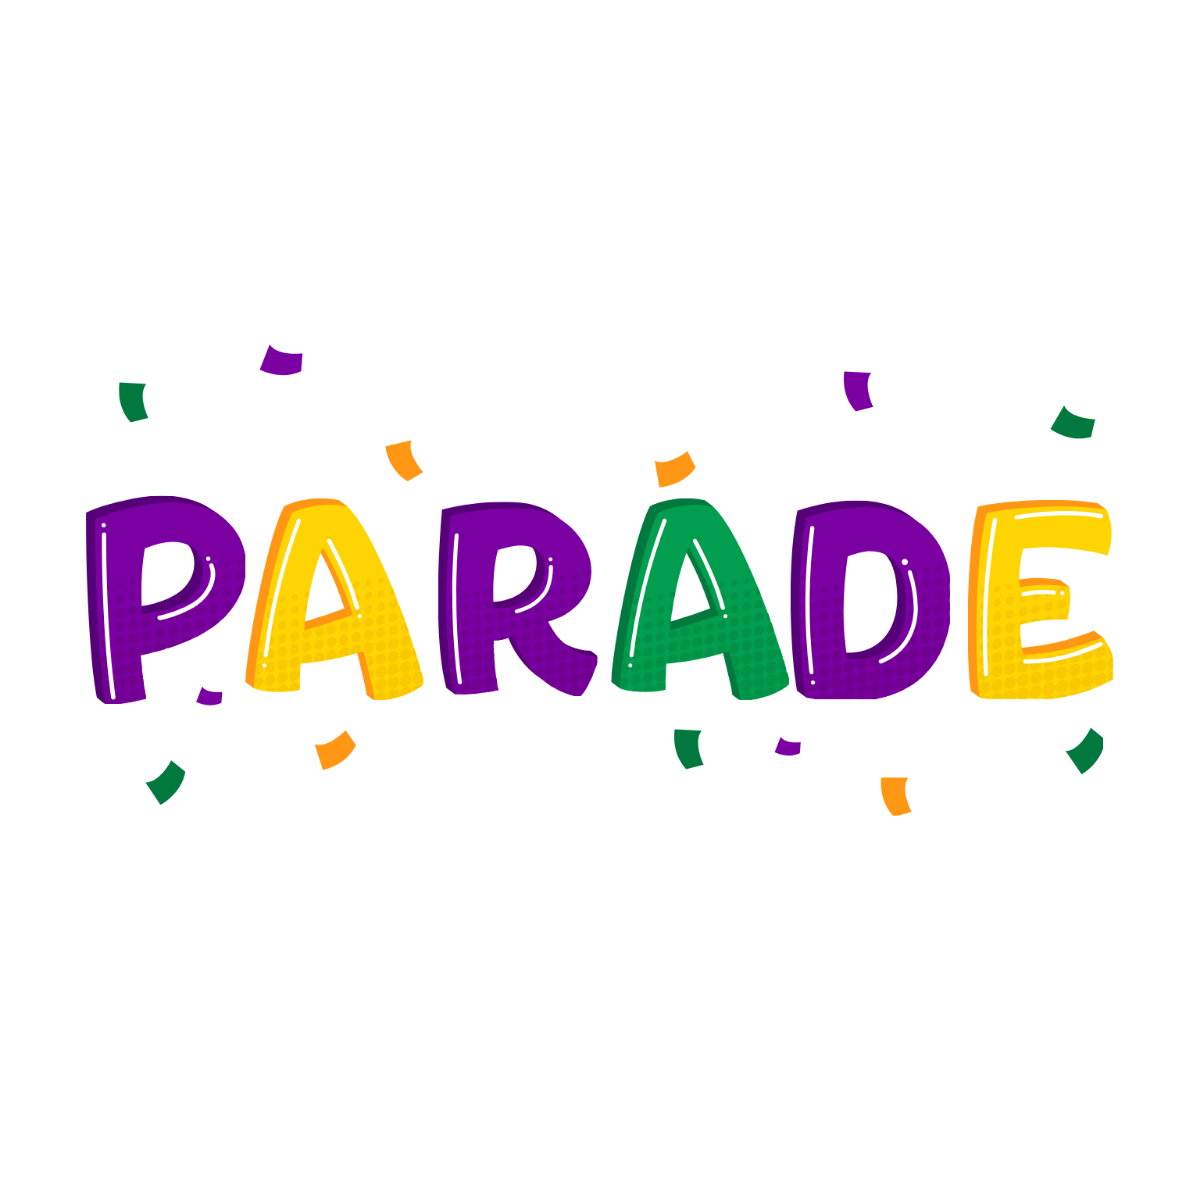 Parade Text Effect Template